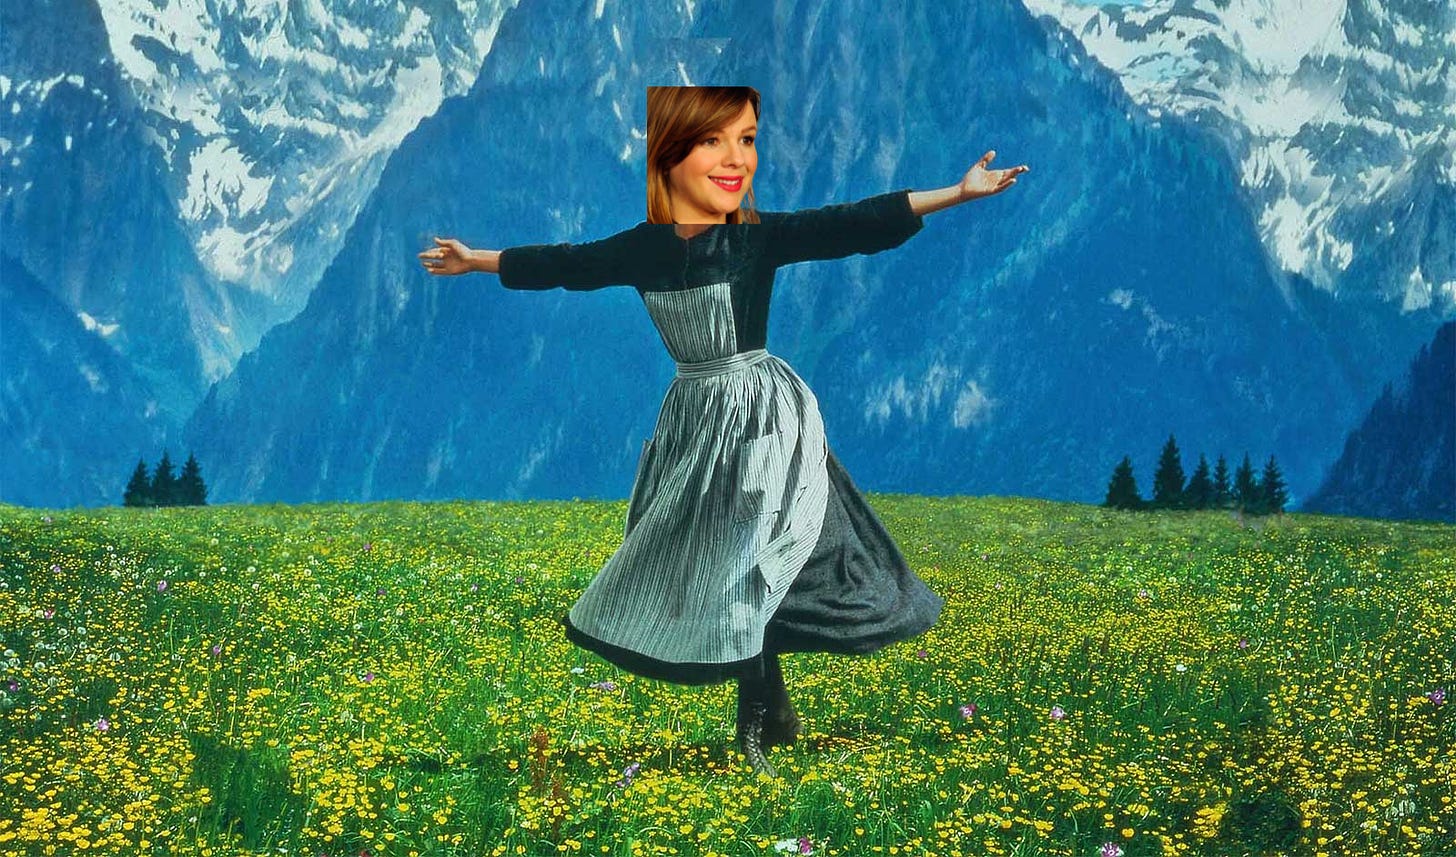 A still from the movie "The Sound of Music" where Julie Andrews is singing and dancing in a field. The image has been poorly and obviously edited to try to make it look like it is Amber singing and dancing in the field. 